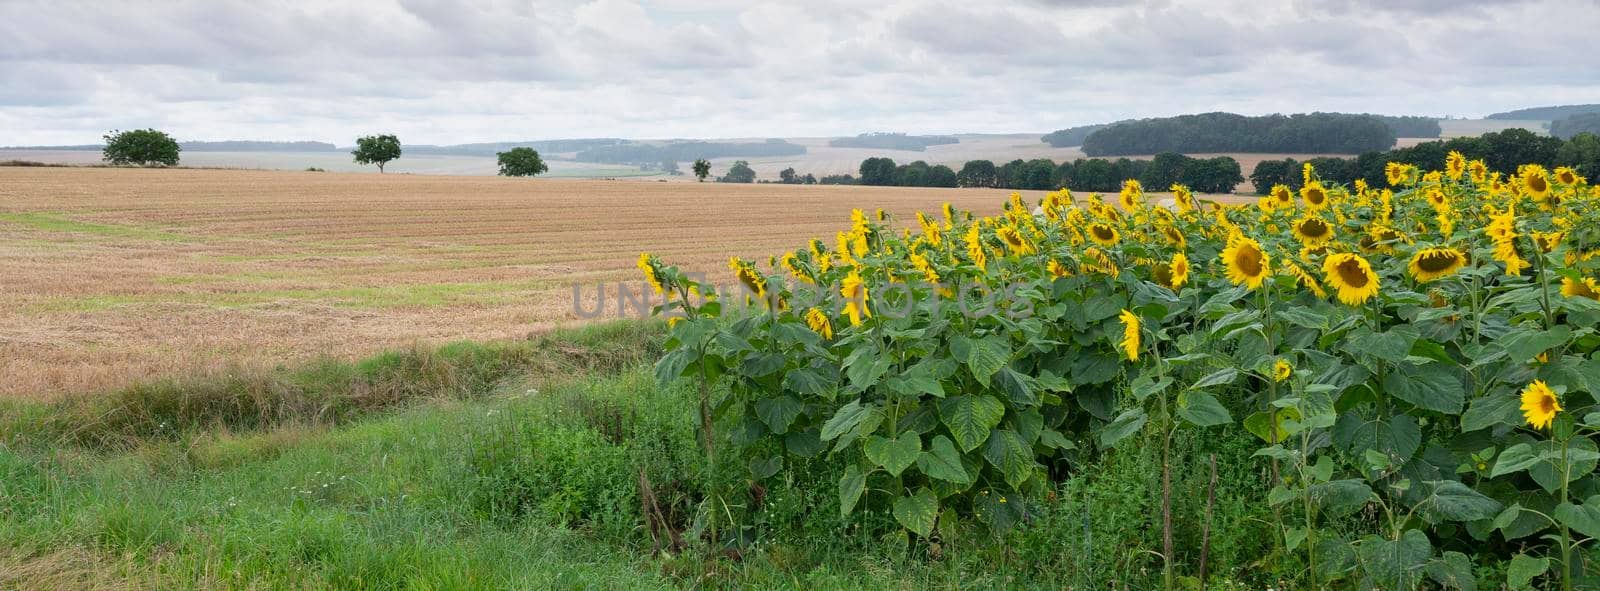 panorama picture with field of sunflowers in rural countryside of northern france near city of reims under cloudy sky in summer